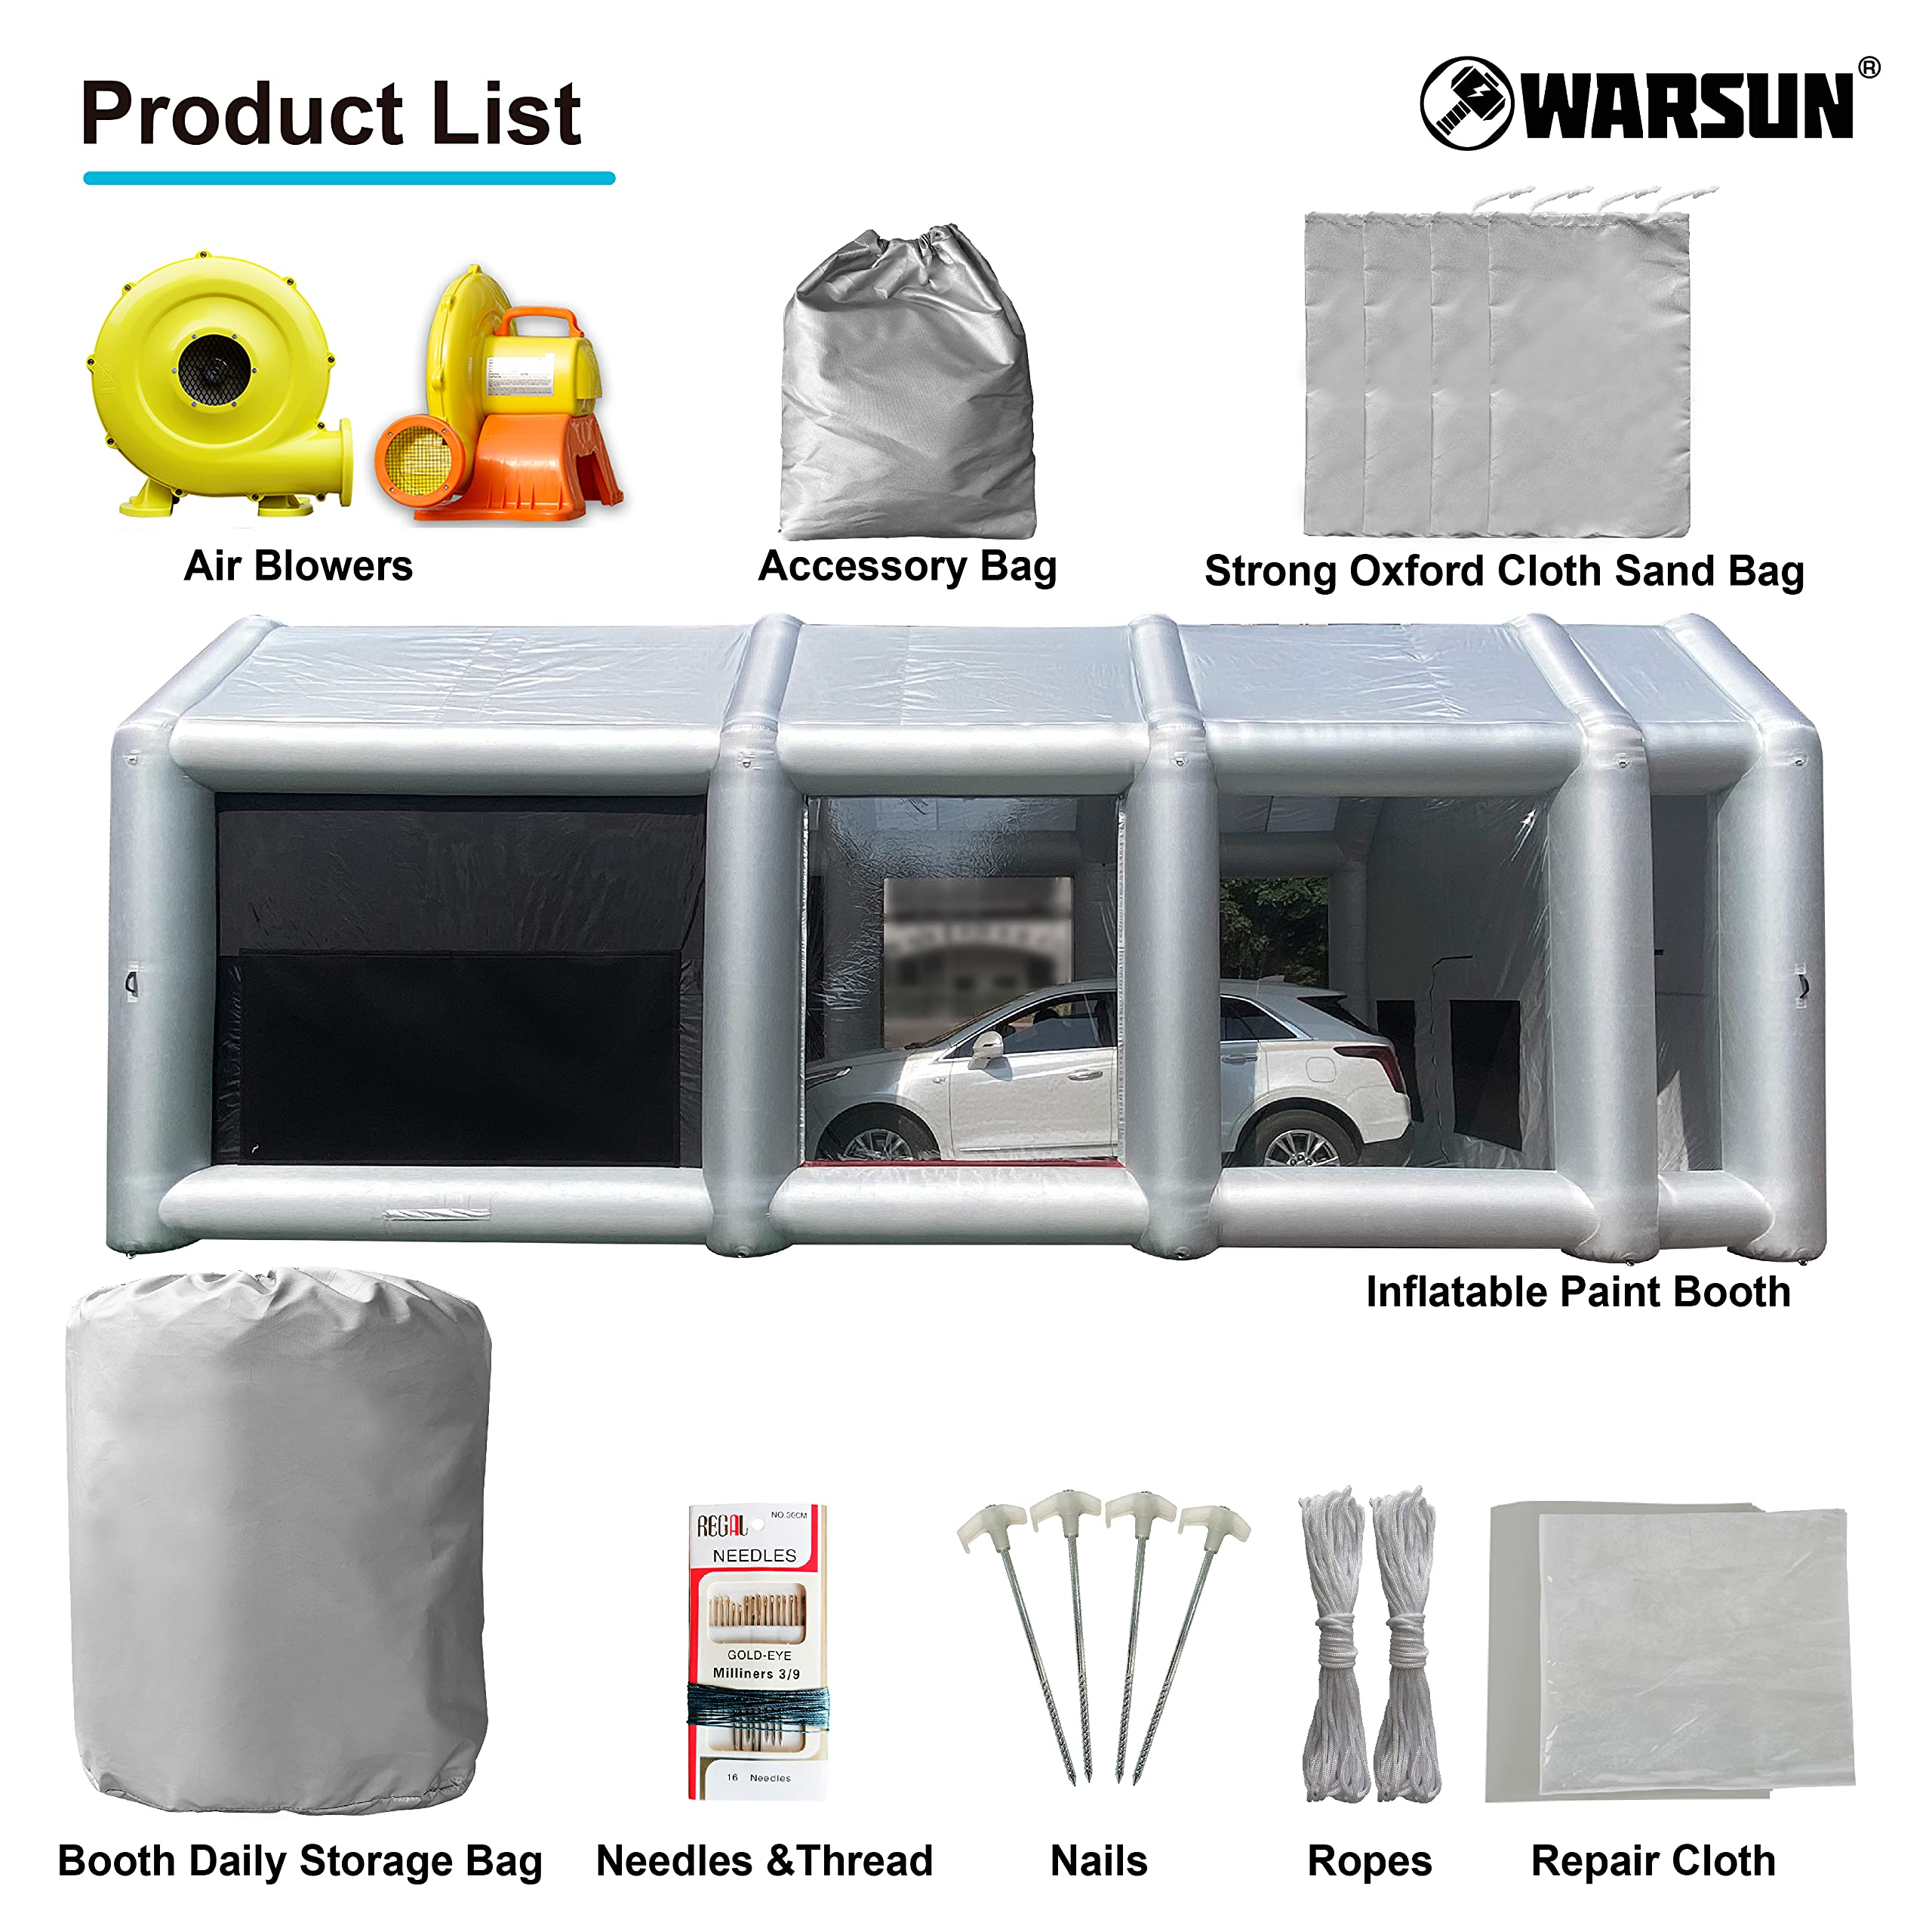 WARSUN 33x16.5x13Ft Inflatable Paint Booth with Oversized EPA Registered Filters, Upgraded Inflatable Spray Booth with Blowers 1100W+750W More Durable Portable Paint Booth Tent for Cars